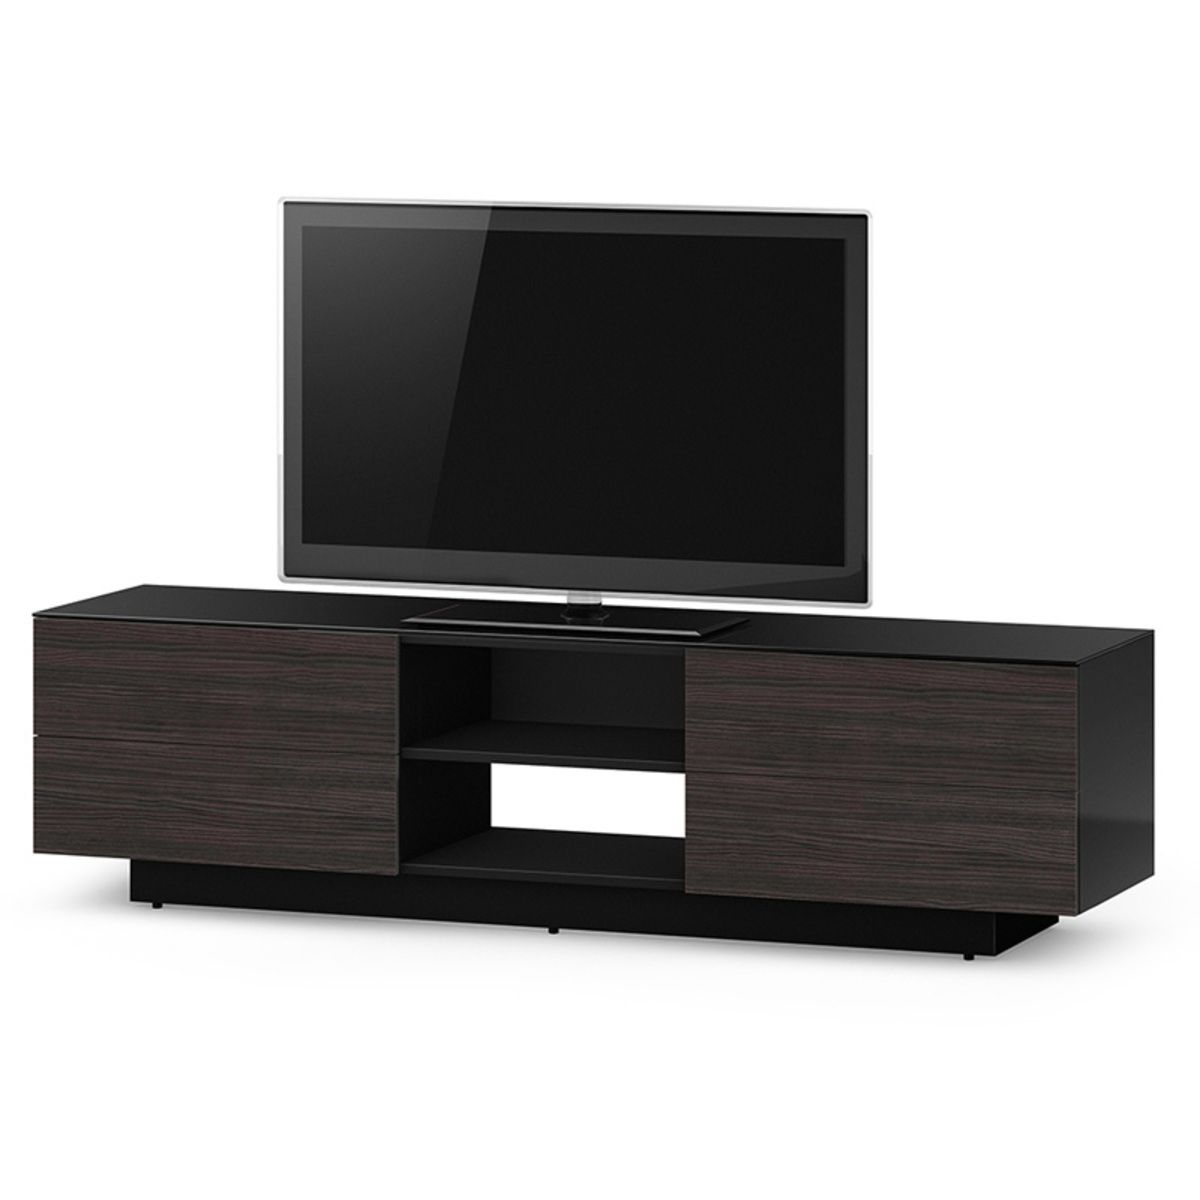 Sonorous Lba1840 Tv Cabinet For Tvs Up To 80", Black Ash Intended For Sonorous Tv Cabinets (View 2 of 15)